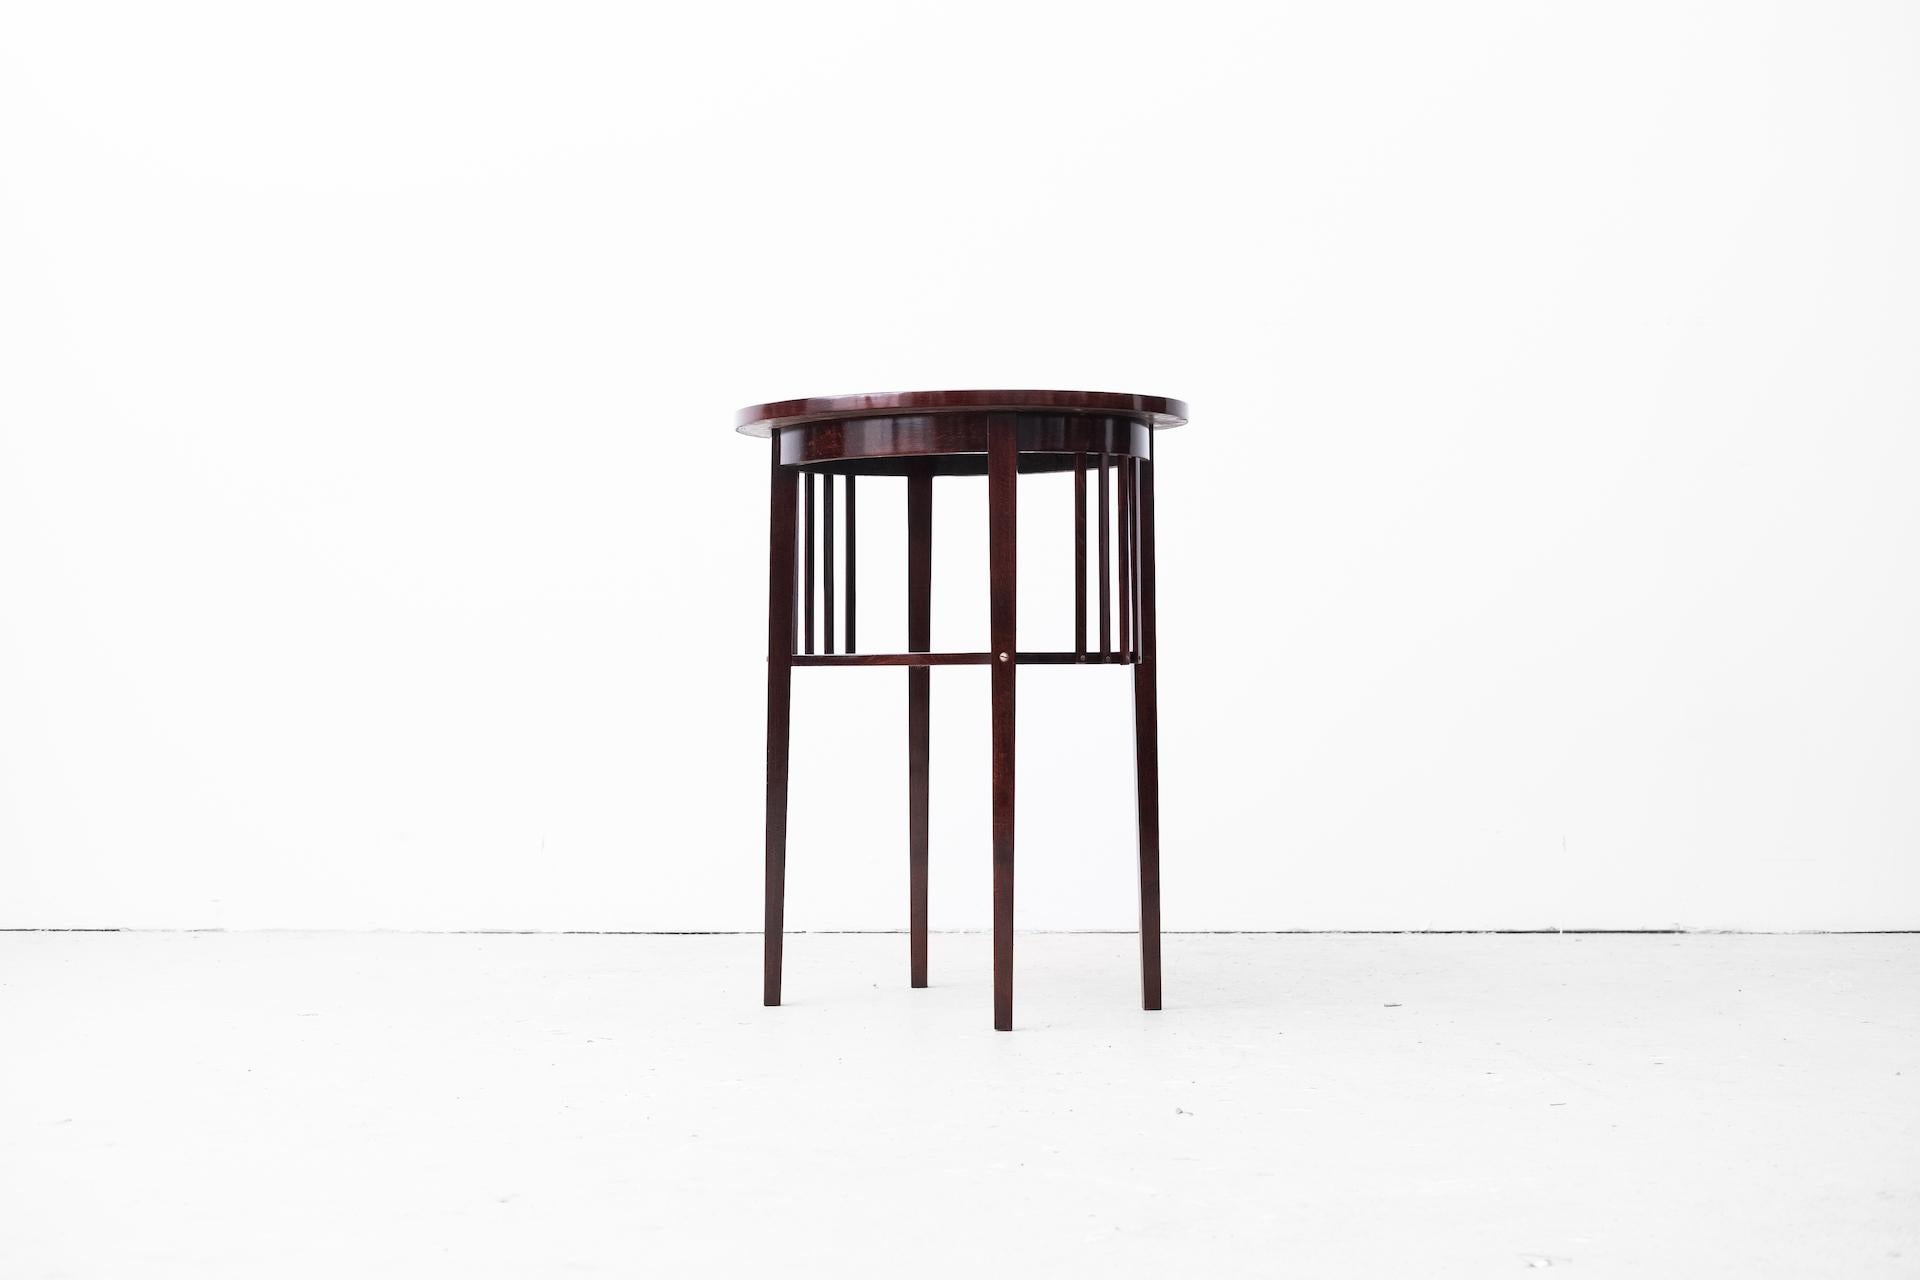 Early 20th Century Art Nouveau Sidetable, Model 9208 by Marcel Kammerer for Thonet (Vienna, 1904)